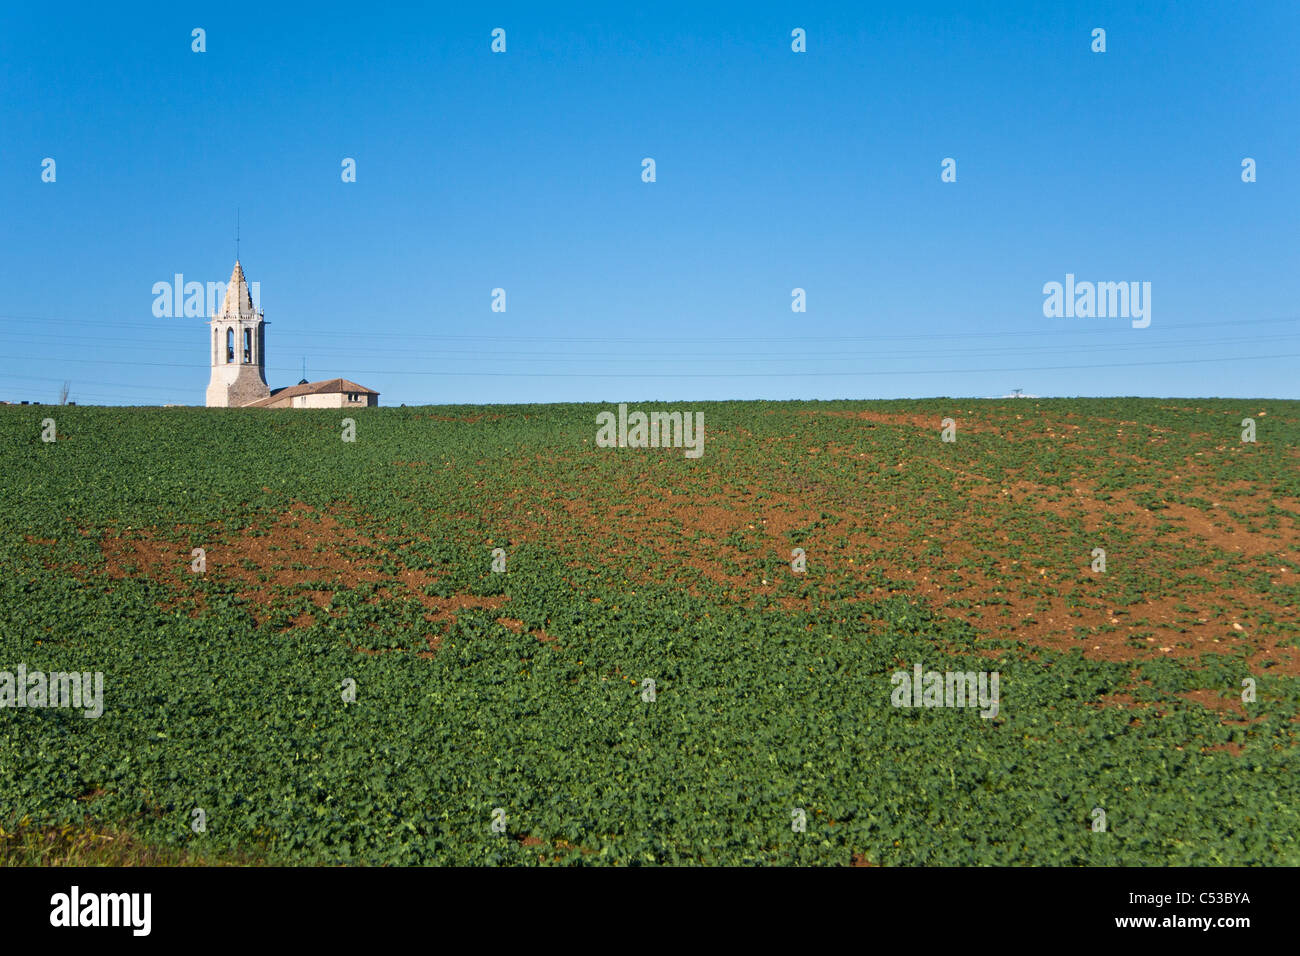 Church on a blue sky day behind a green field Stock Photo